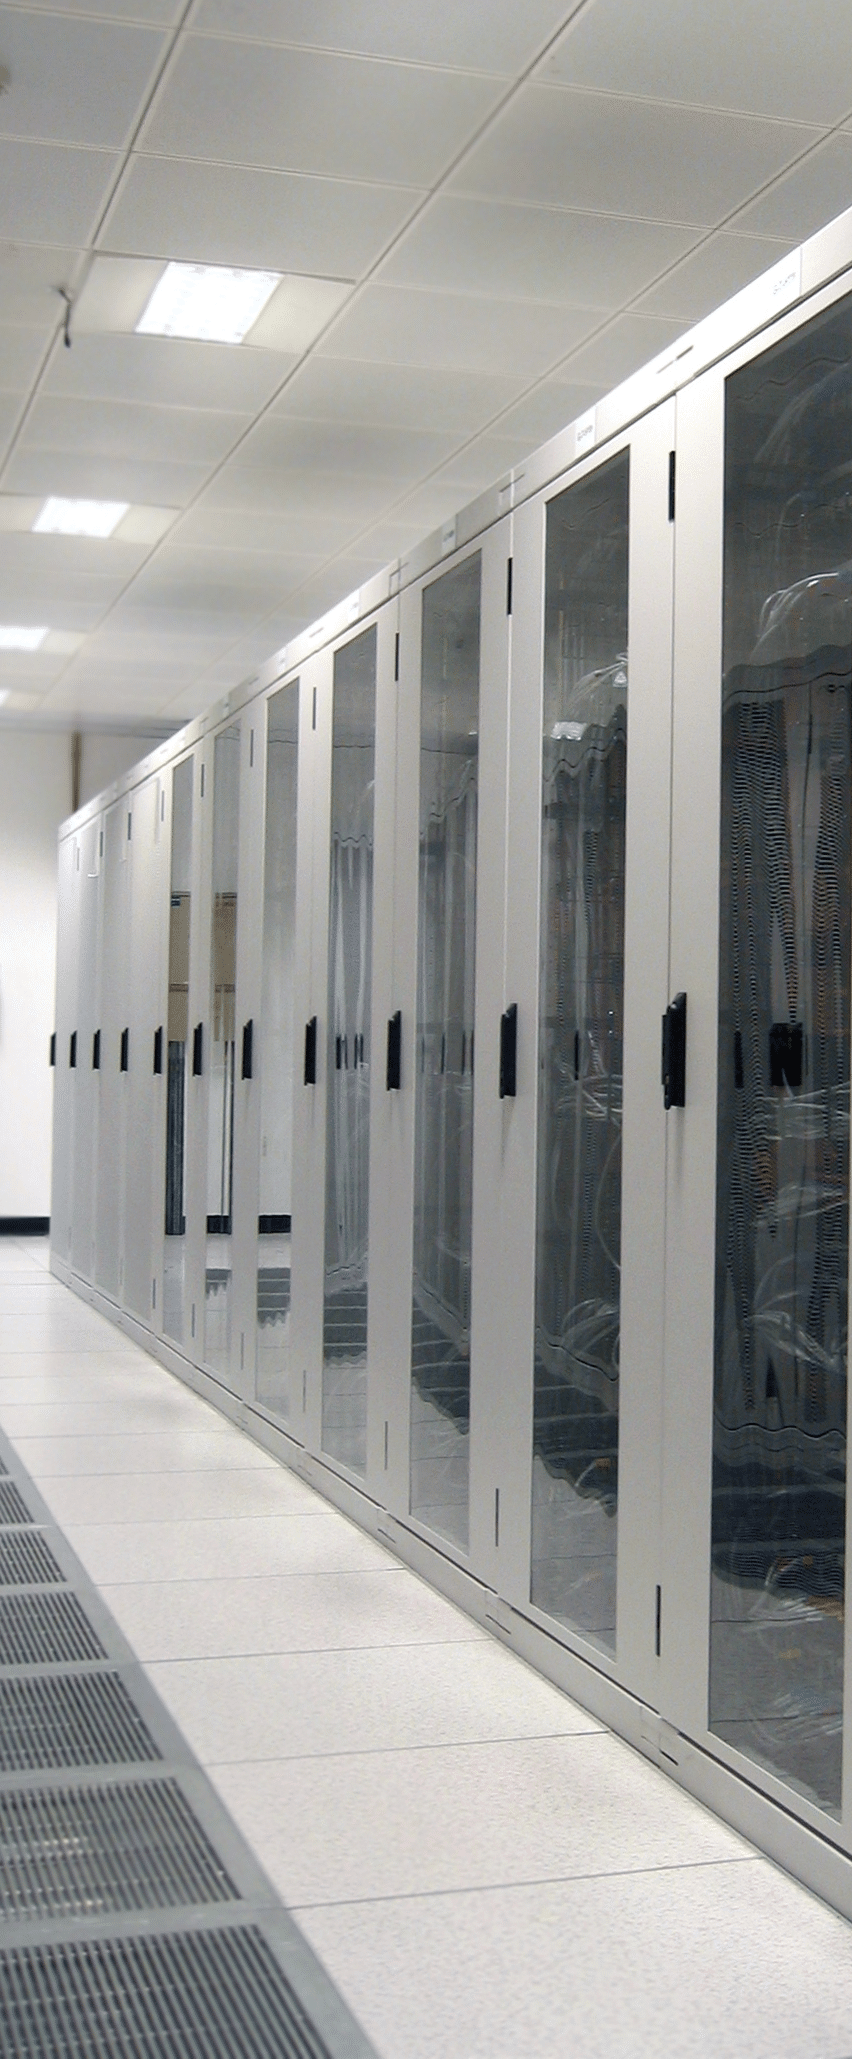 Rows of server cabinets in a web hosting data center with glass doors and cable management visible, under bright overhead lighting.